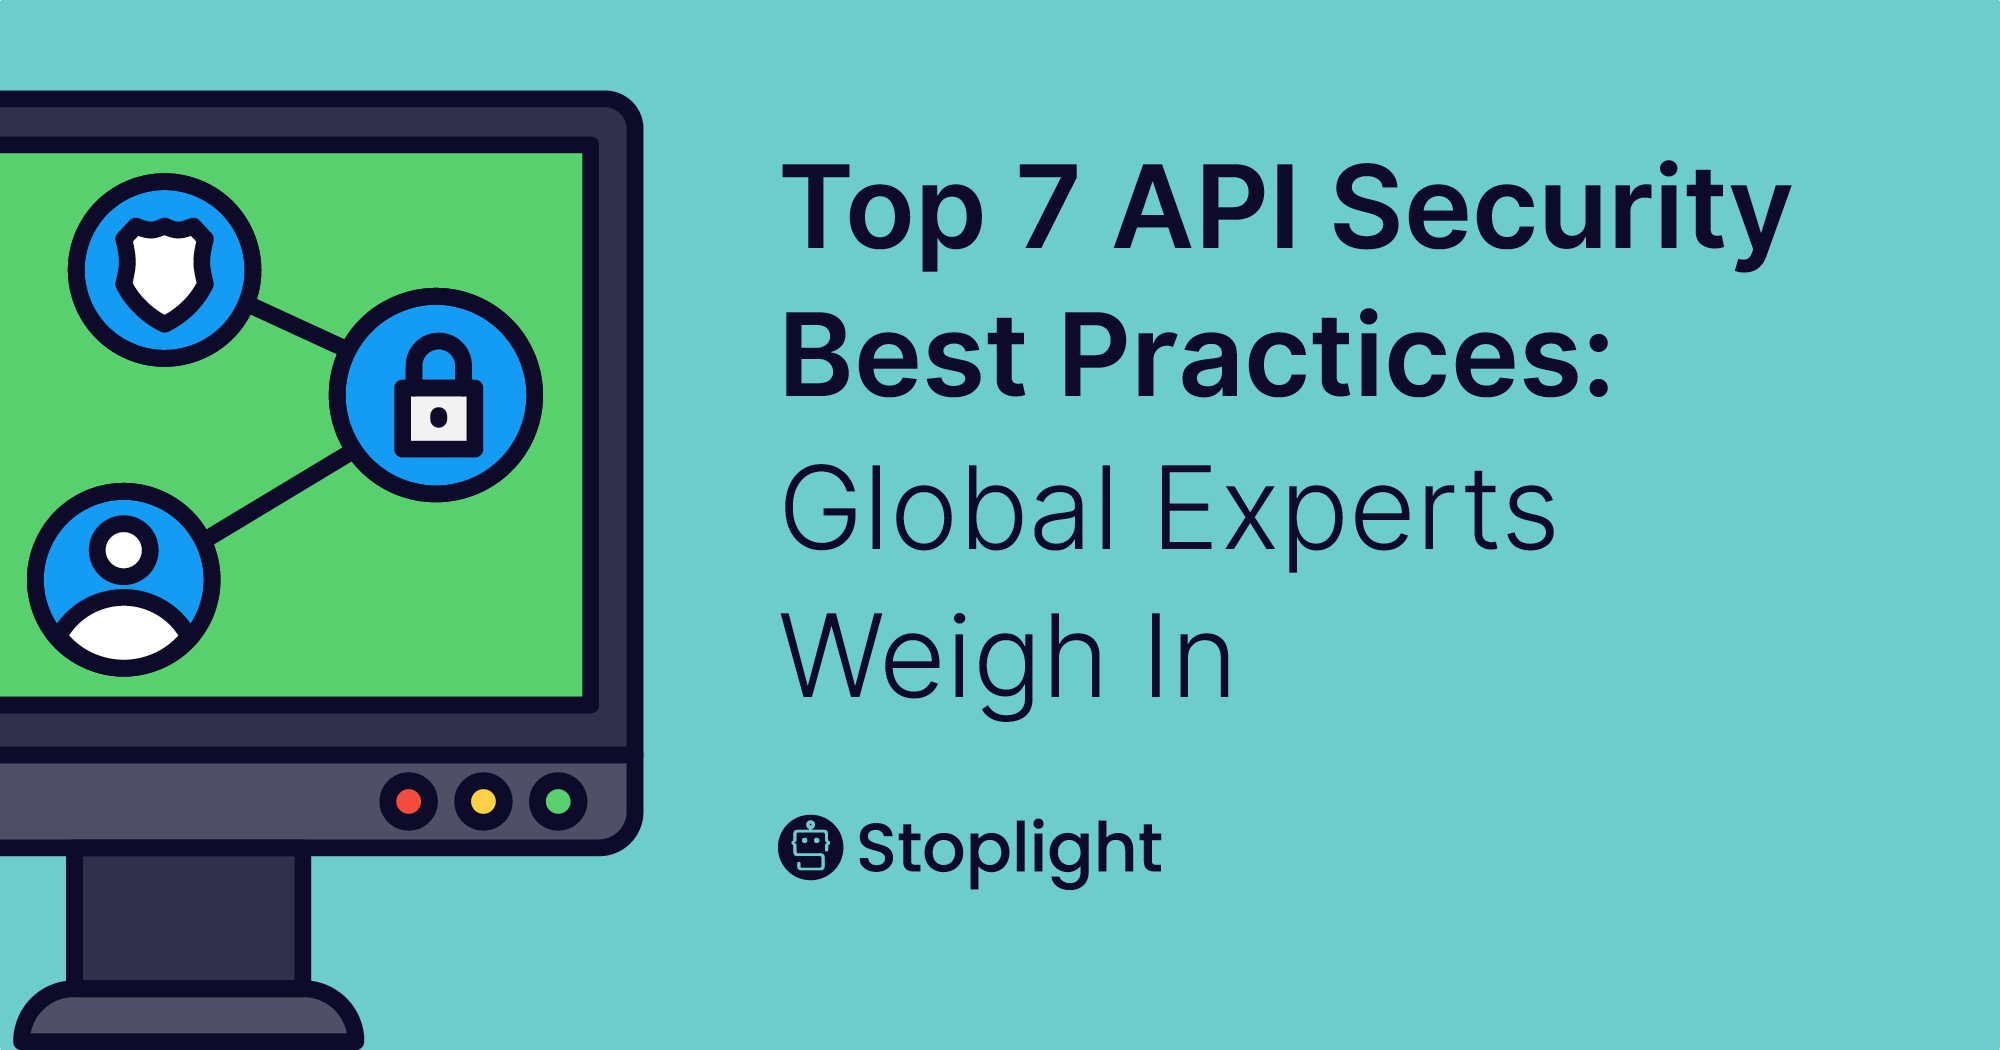 Top 7 API Security Best Practices: Global Experts Weigh In